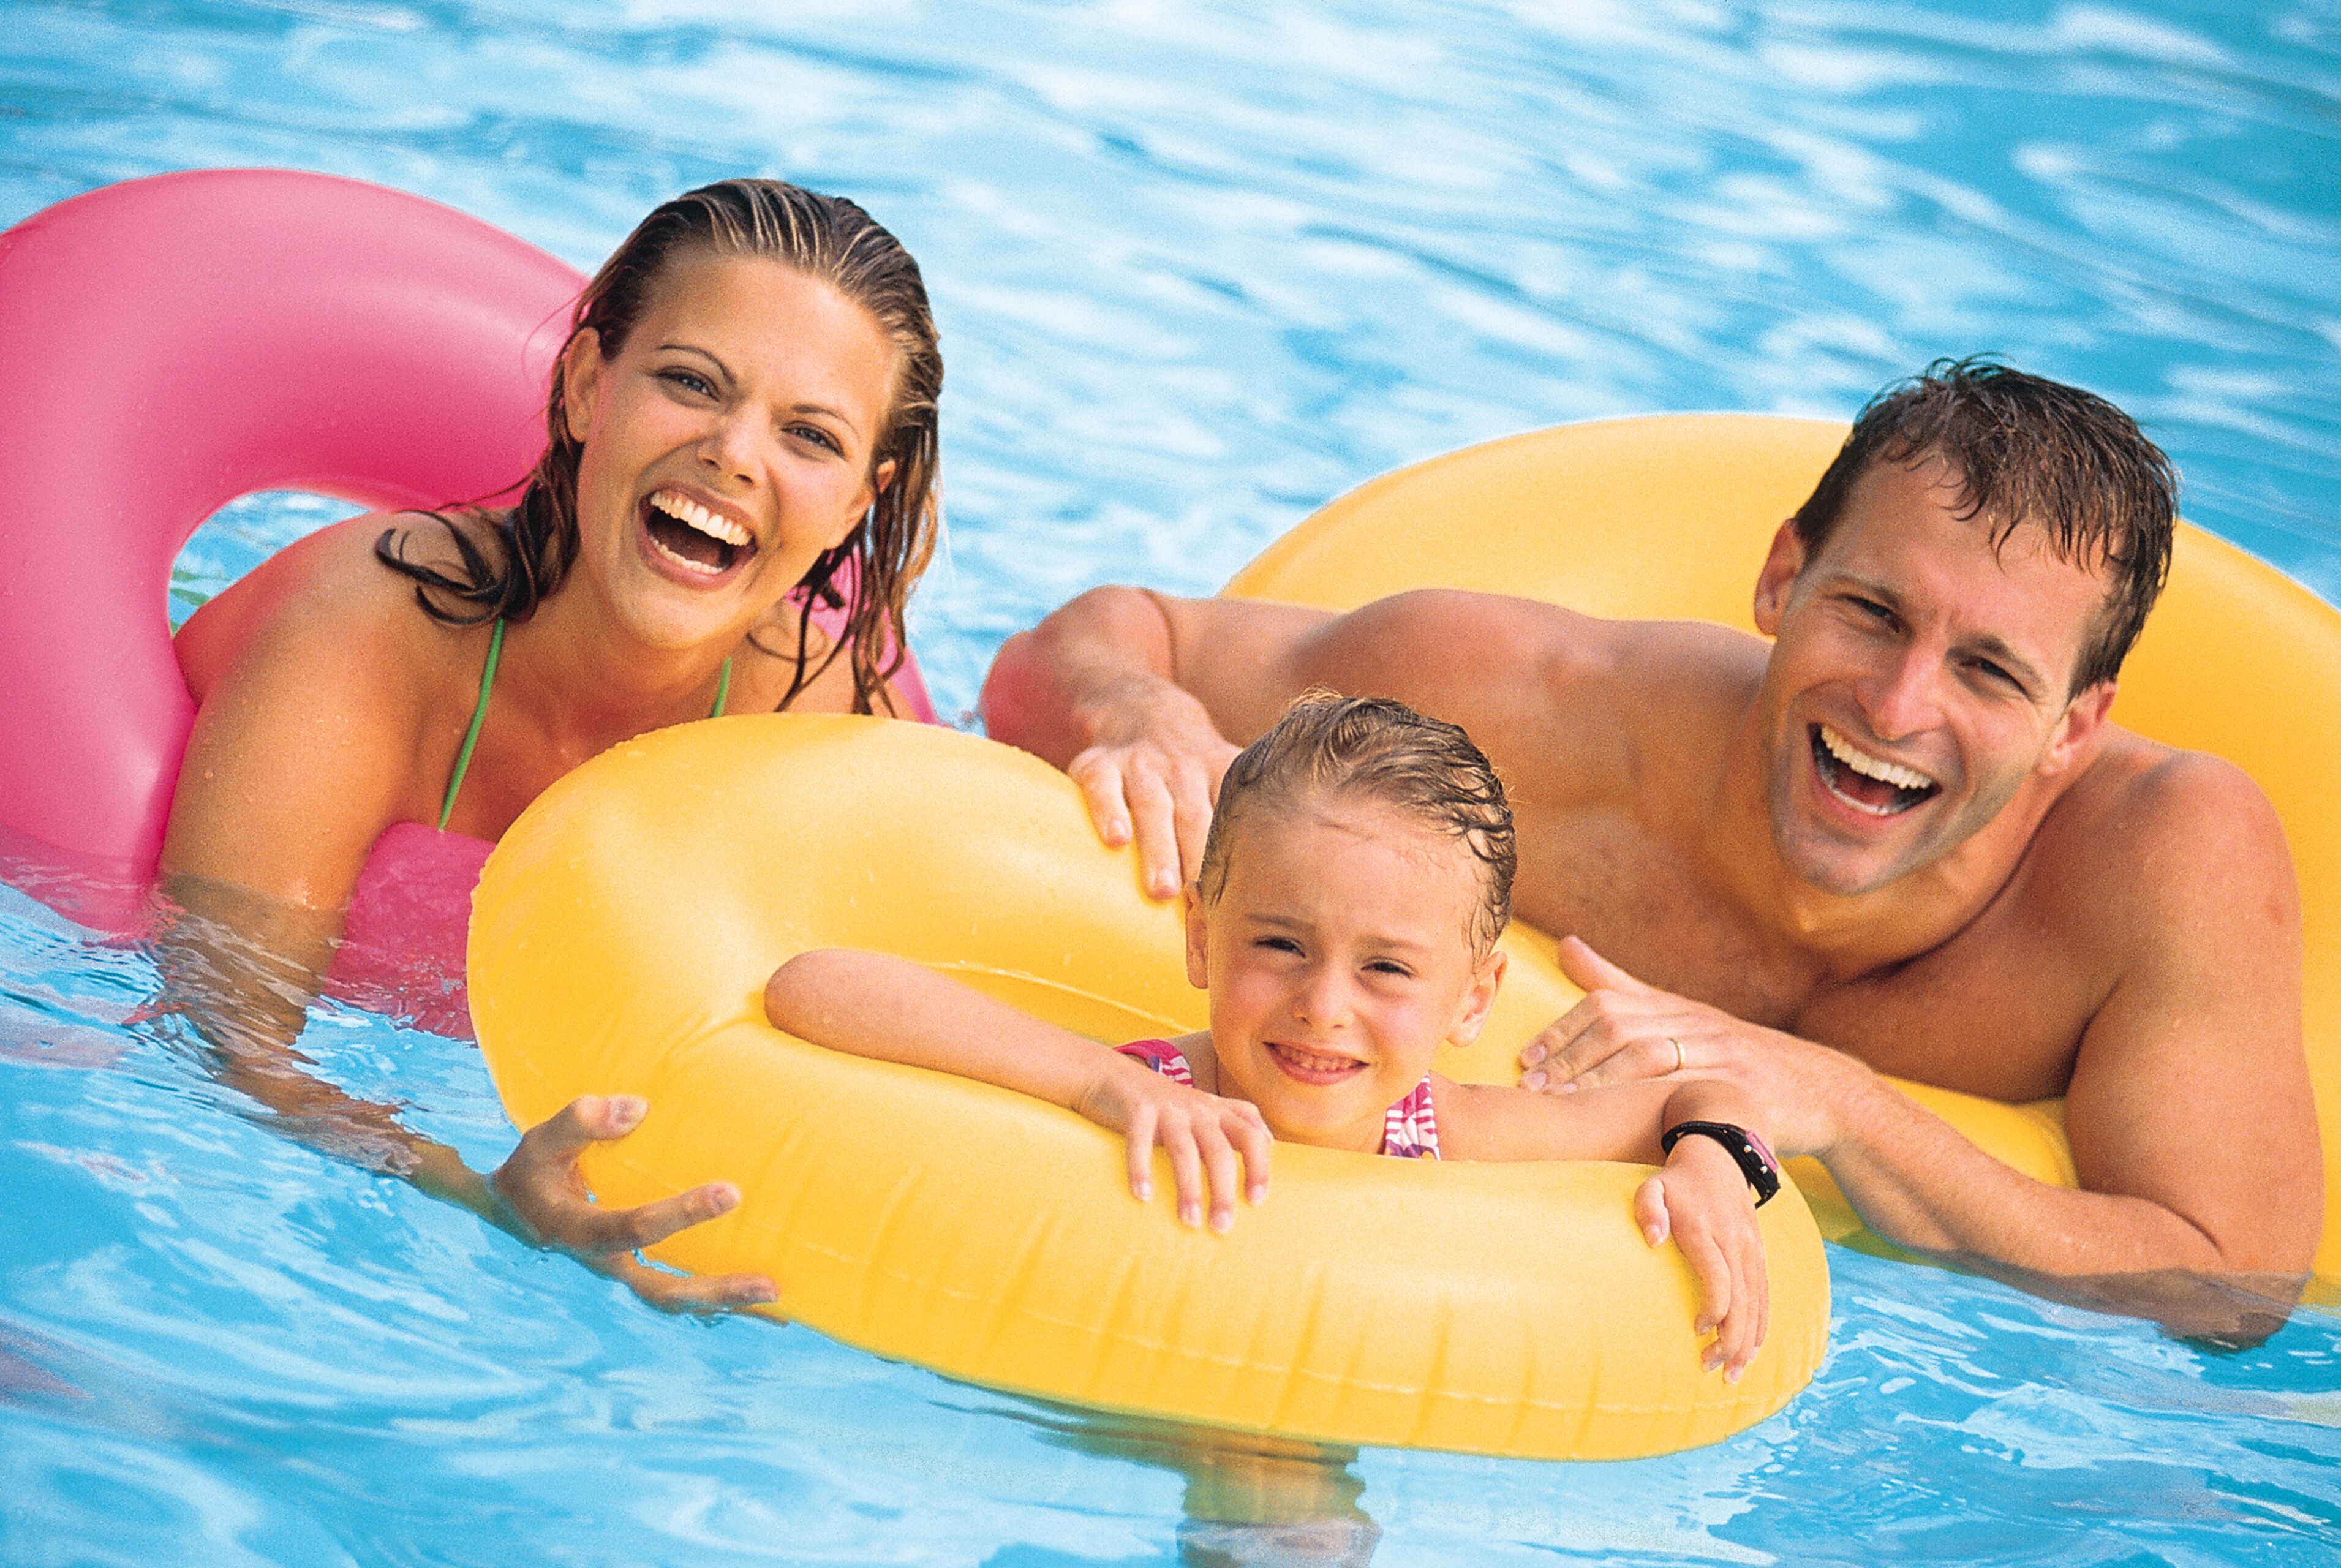 What Are the Advantages of Vinyl Pools?